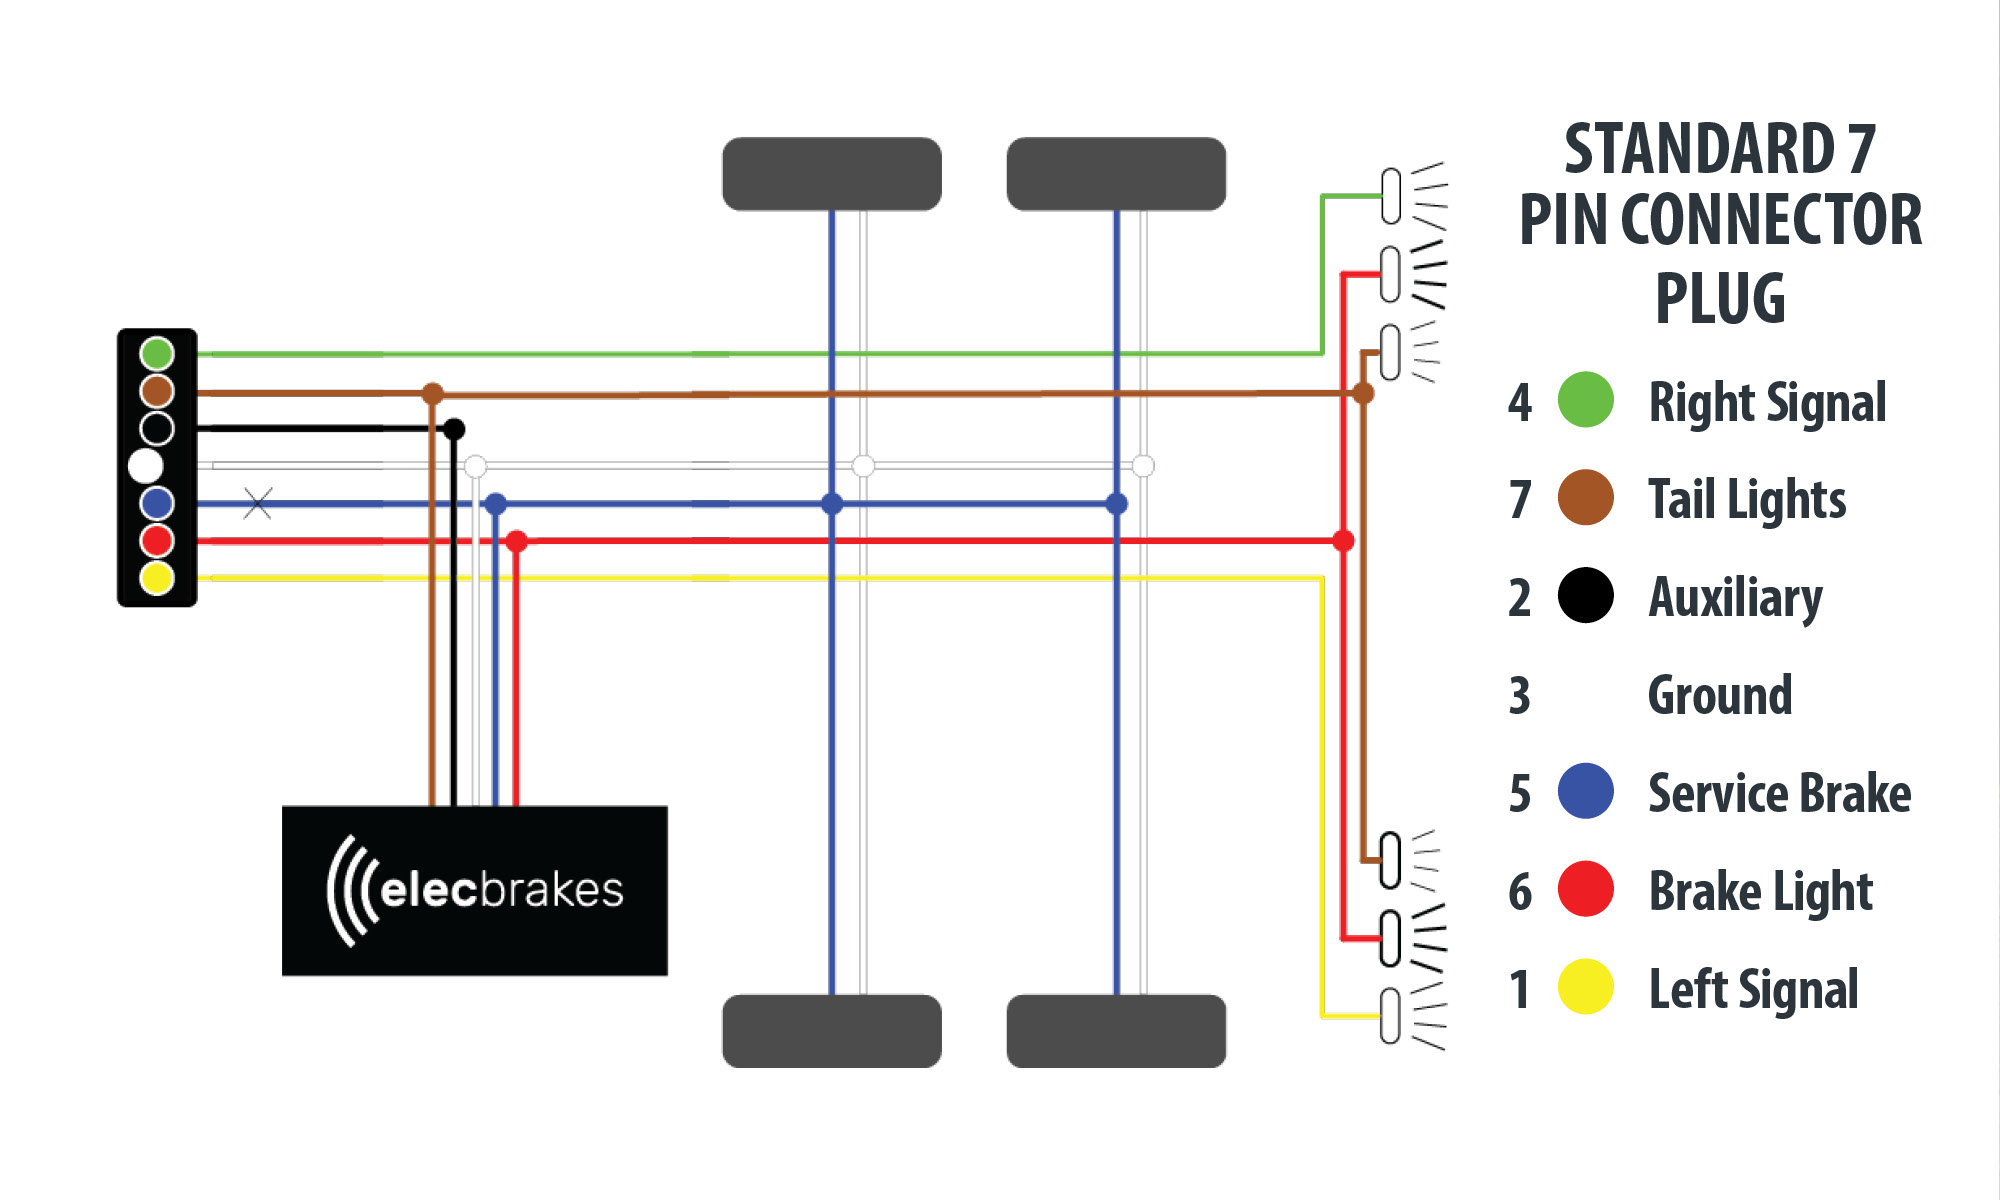 Wiring Diagram For Electric Brakes On A Trailer